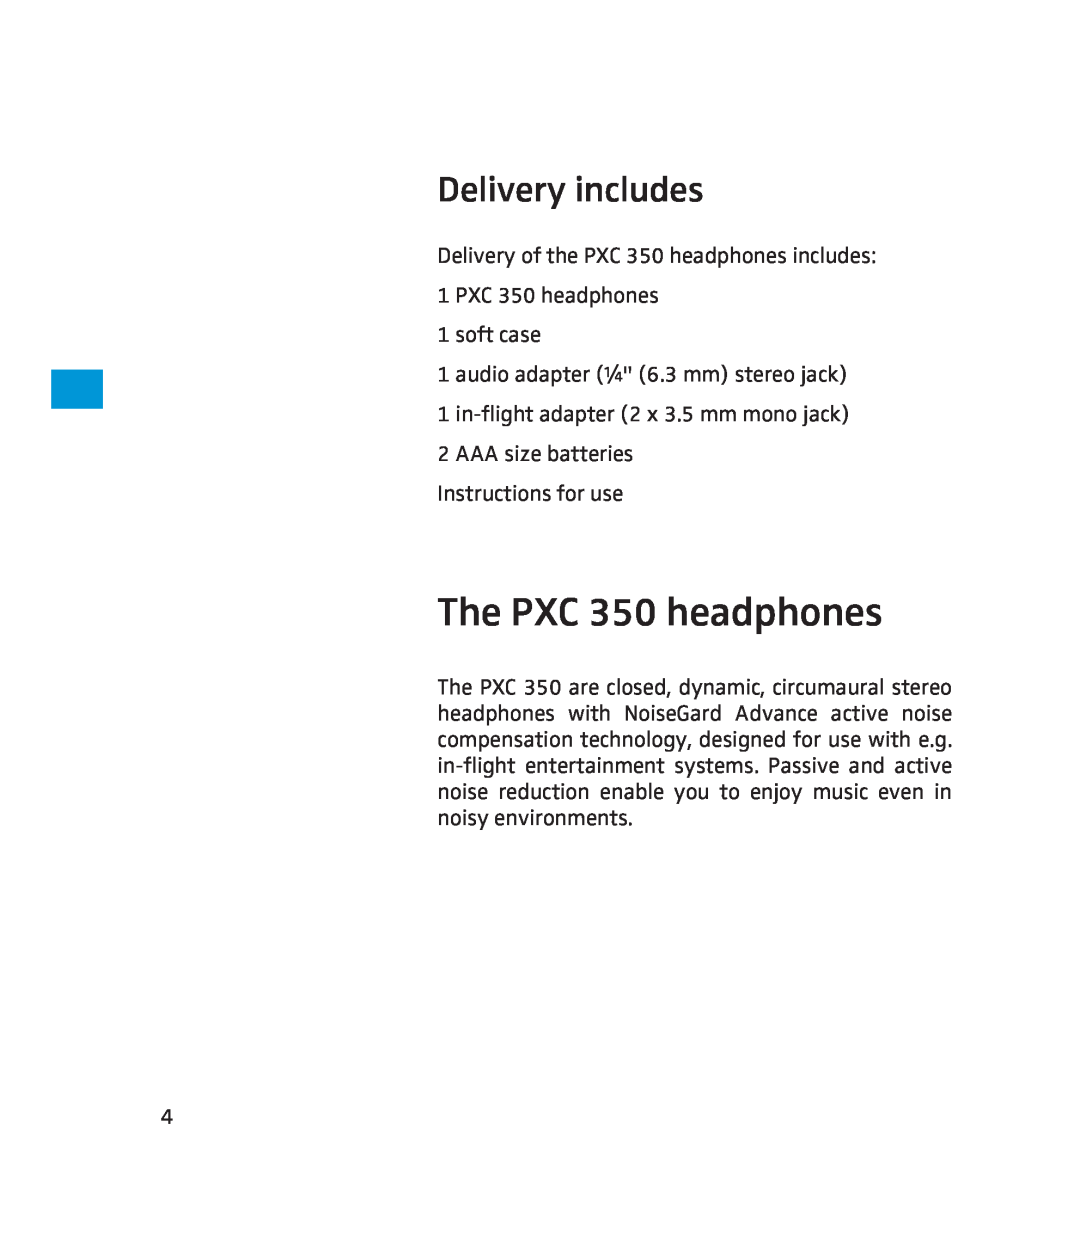 Sennheiser 500371 instruction manual The PXC 350 headphones, Delivery includes 